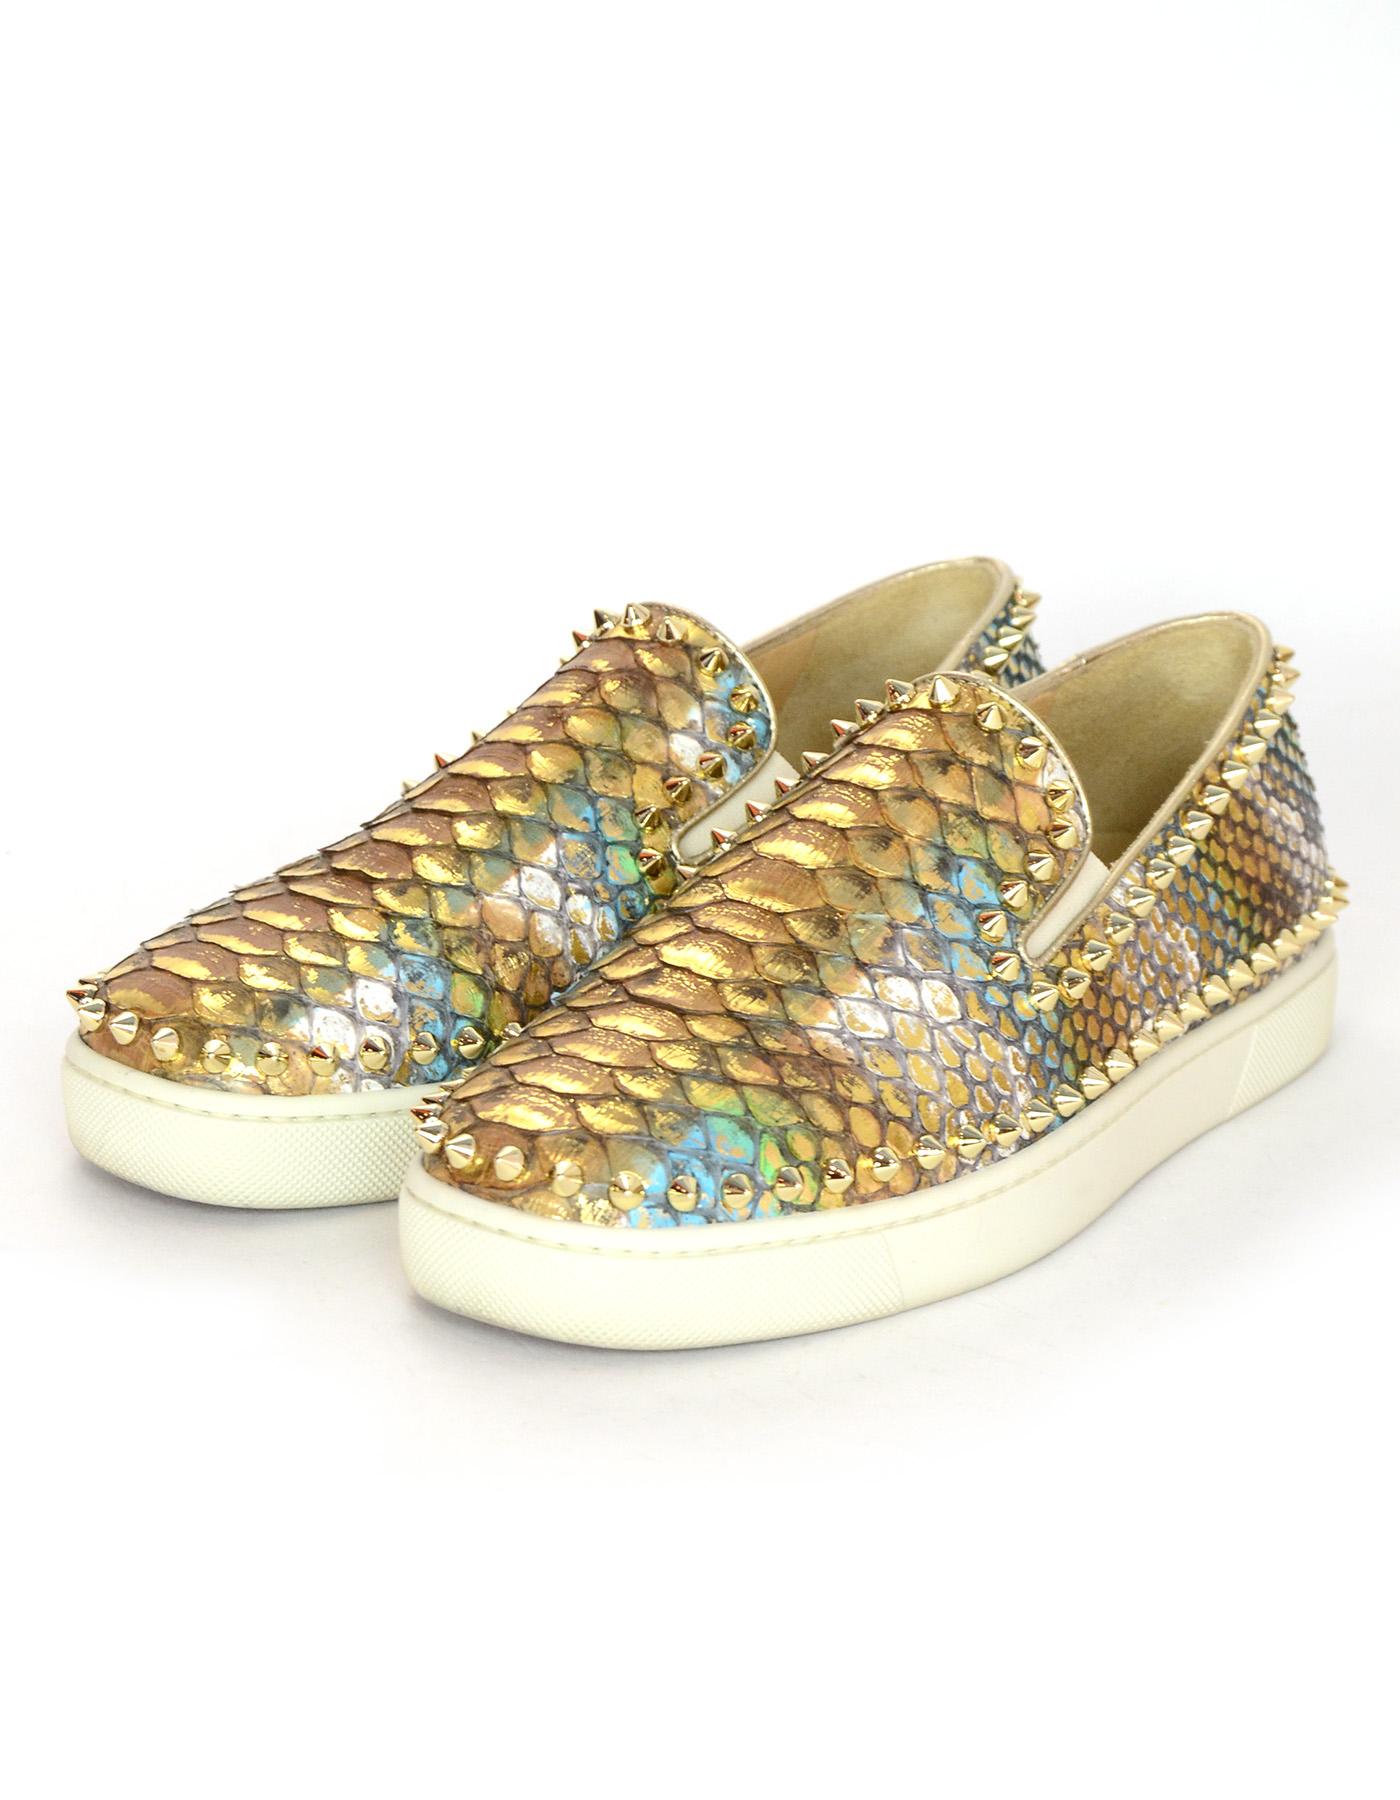 Christian Louboutin Metallic Python Studded Pik Boat Sneakers sz 38.5
Features gold/blue/green/white metallic python with gold spike studded trim

Made In: Italy
Color: Gold, white, green, blue
Materials: Python, metal, rubber,